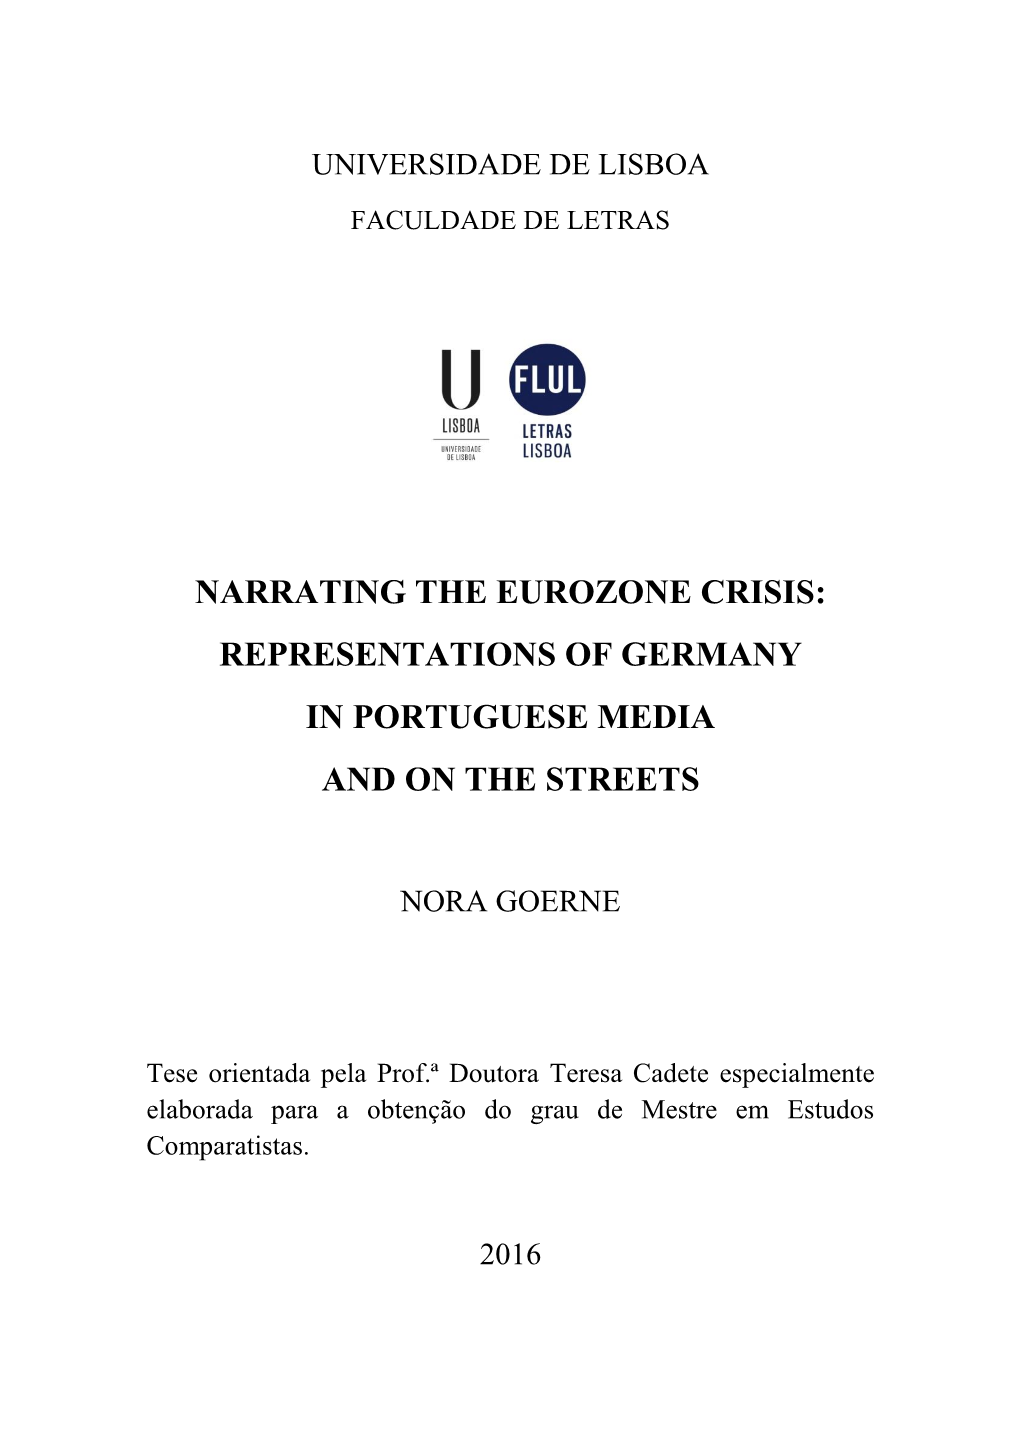 Narrating the Eurozone Crisis: Representations of Germany in Portuguese Media and on the Streets